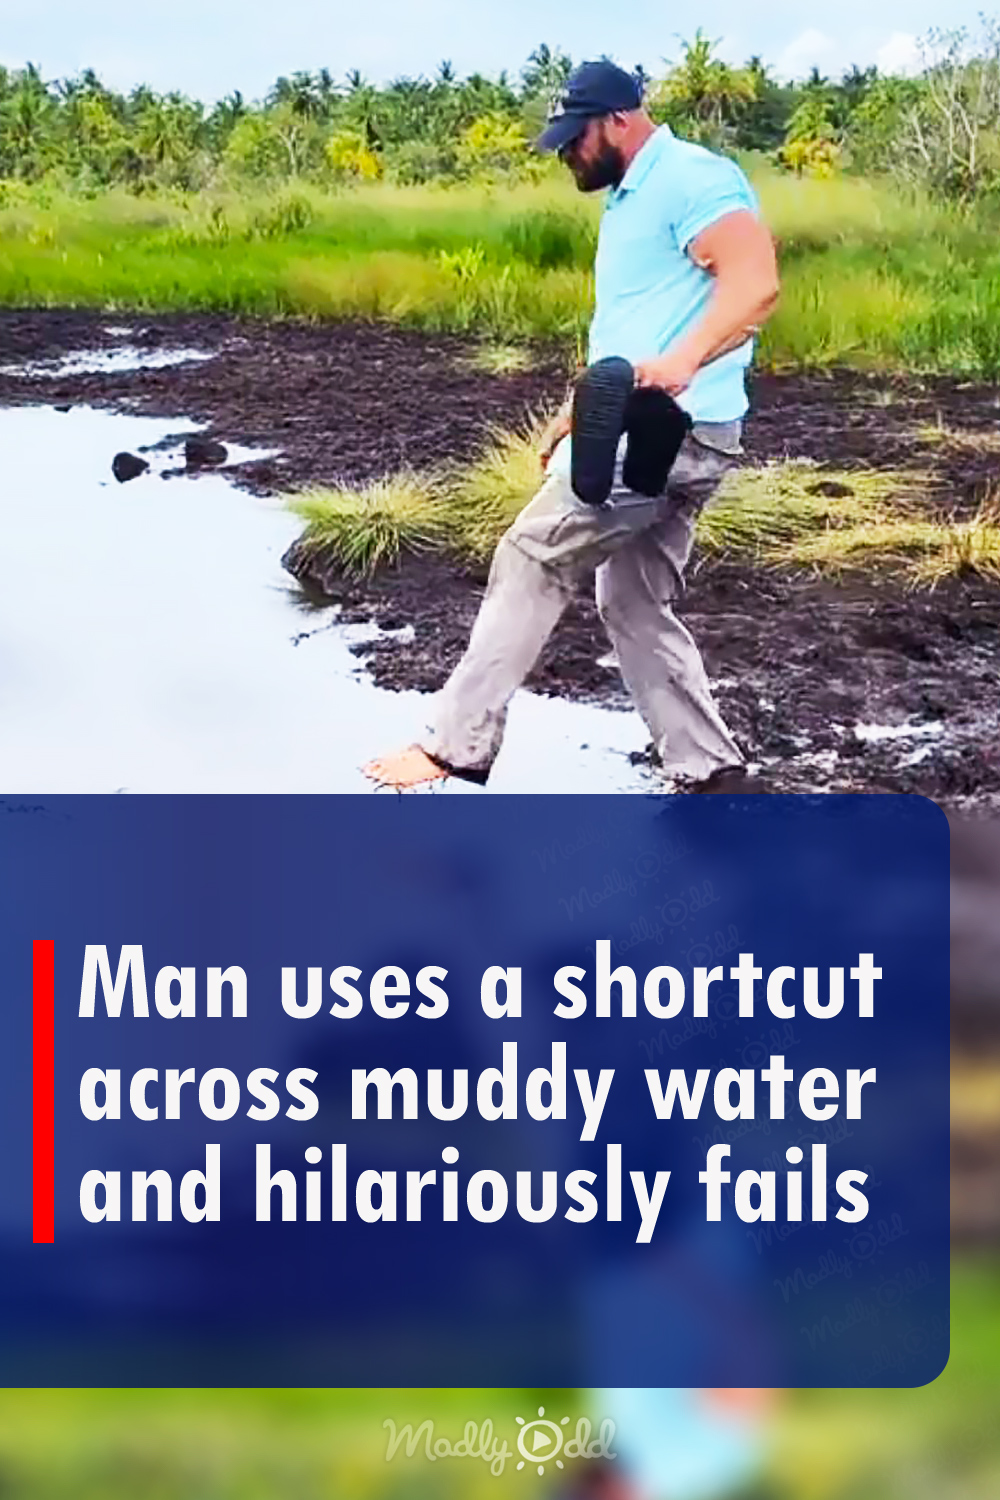 Man uses a shortcut across muddy water and hilariously fails